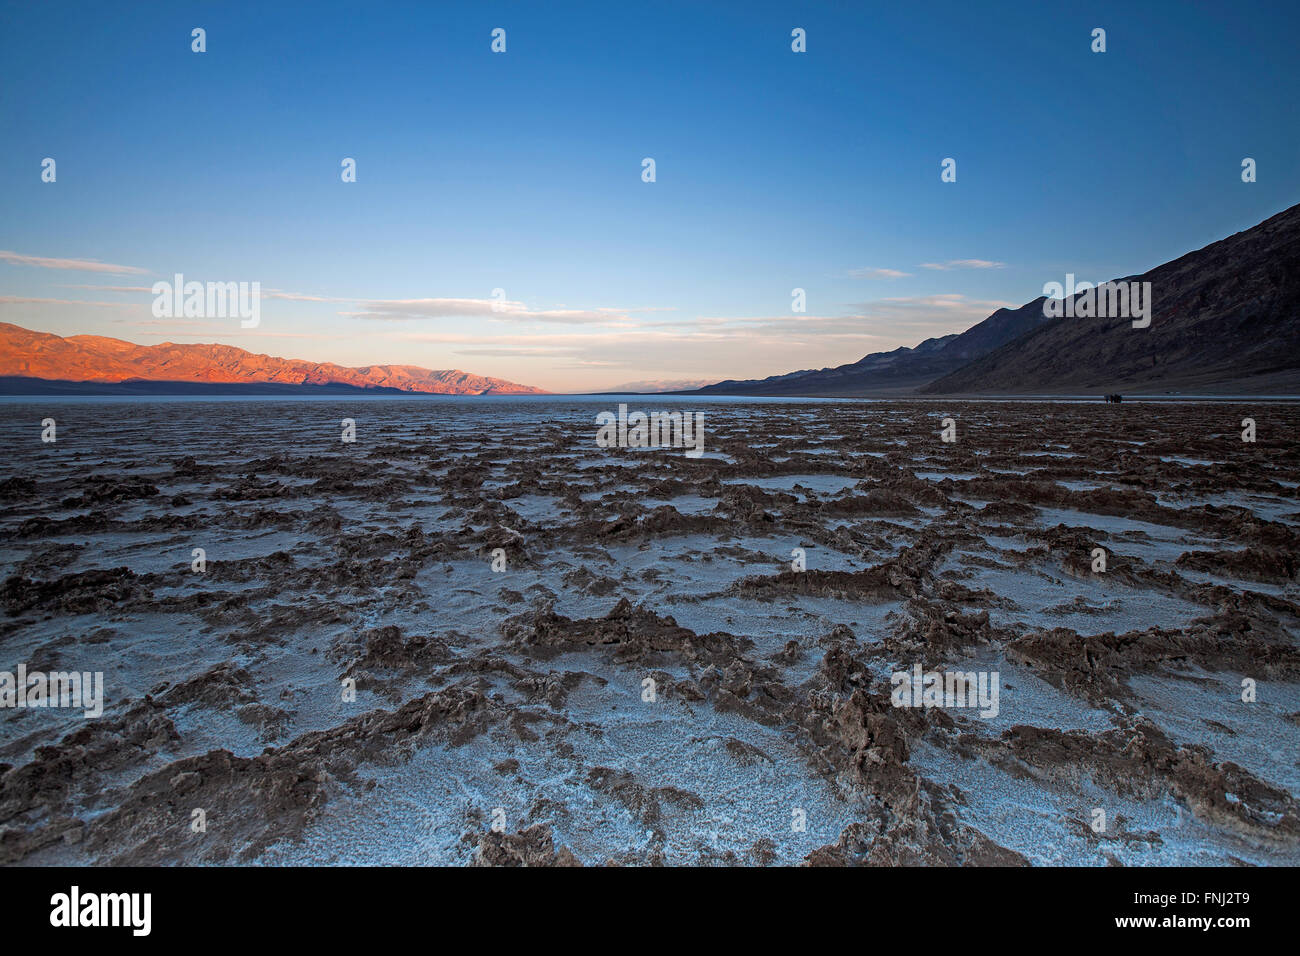 Salt flats at Badwater Basin at sunrise, Death Valley National Park, California, United States of America Stock Photo